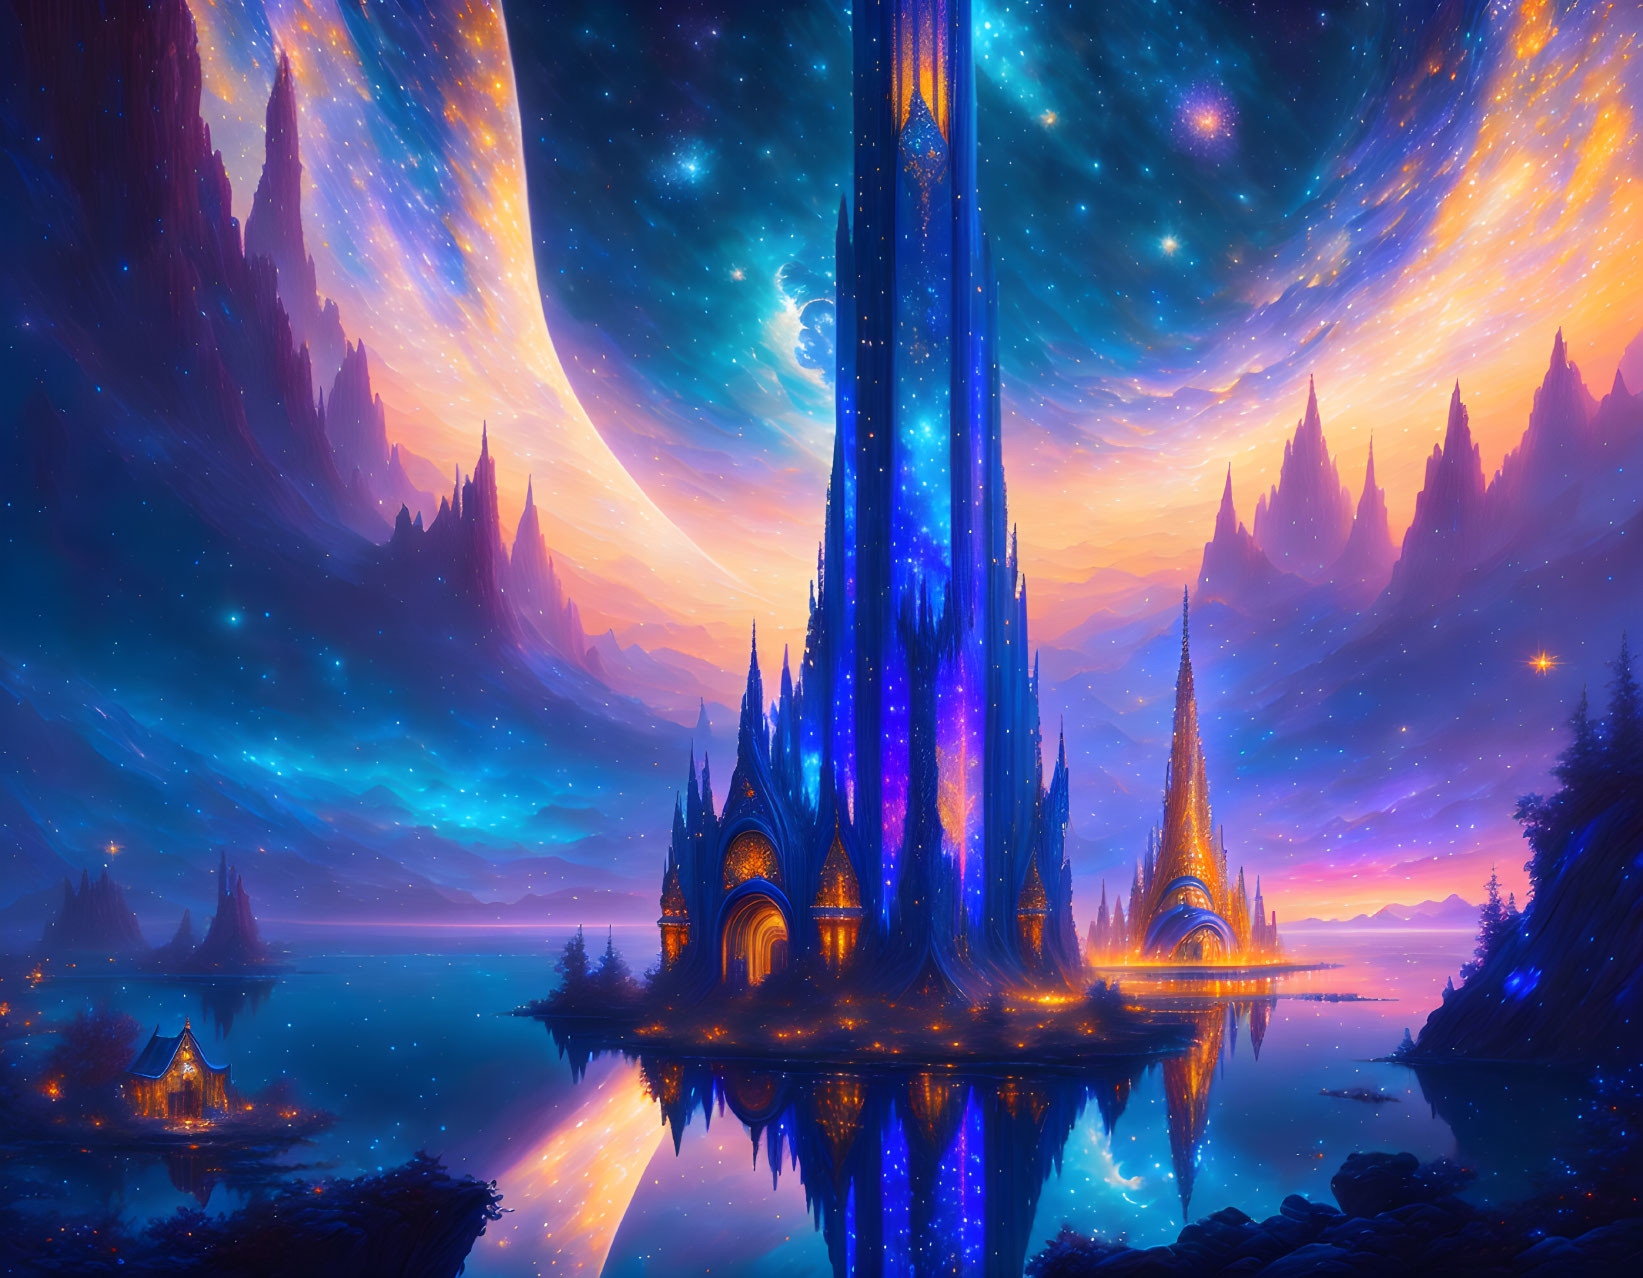 Fantasy landscape digital artwork with luminous buildings and starry sky